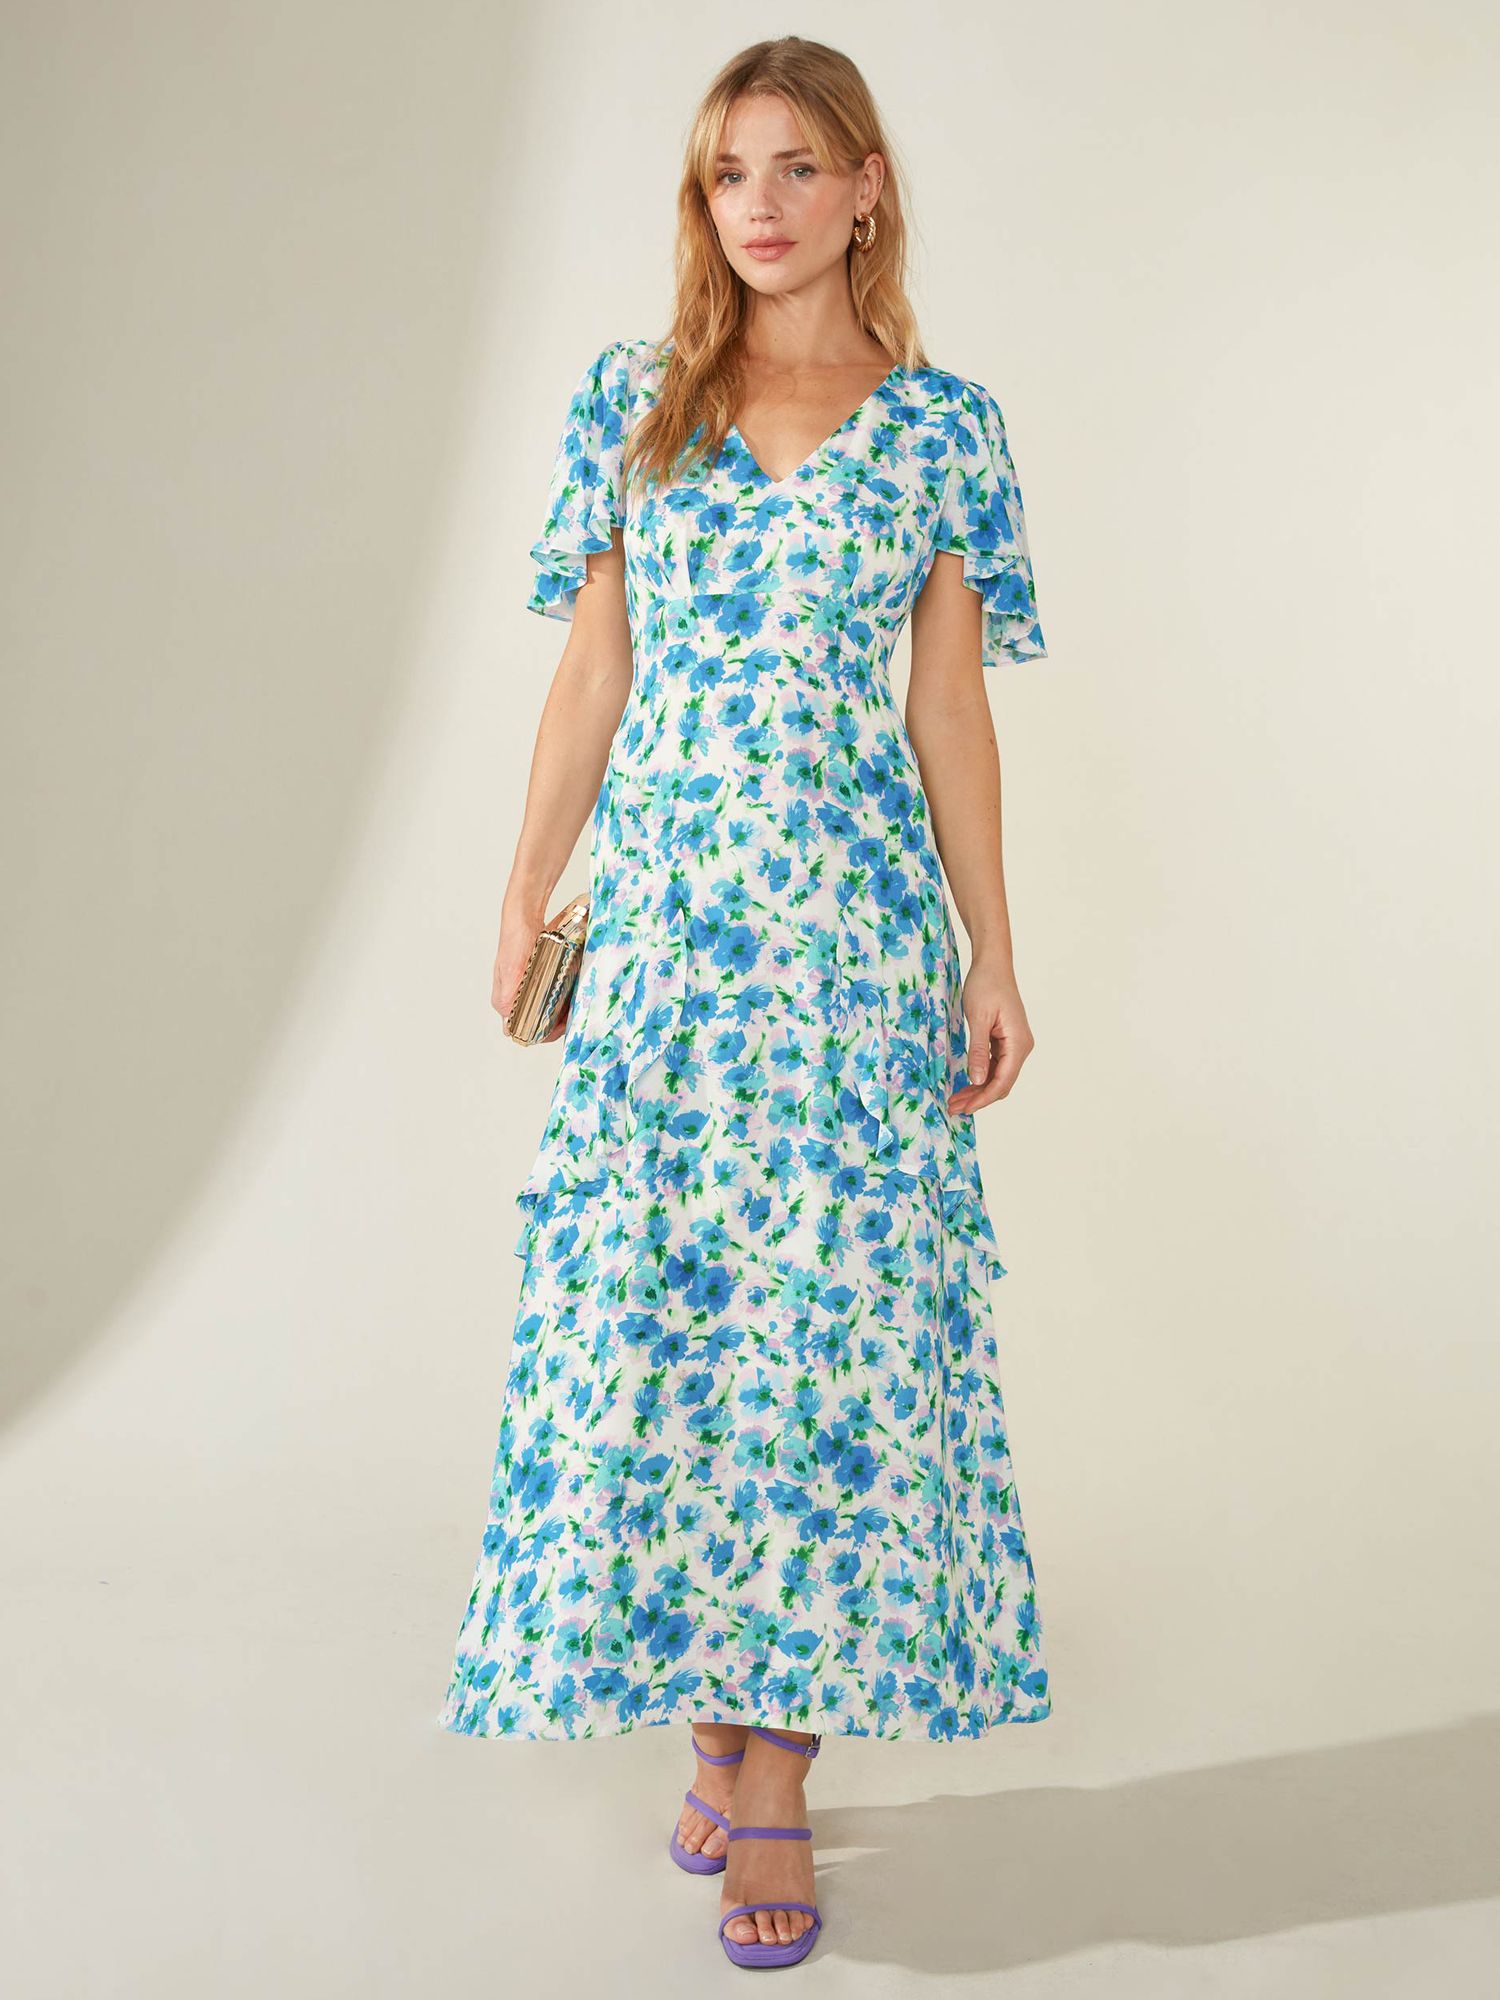 Ro&Zo Daphne Floral Tiered Dress, Blue at John Lewis & Partners